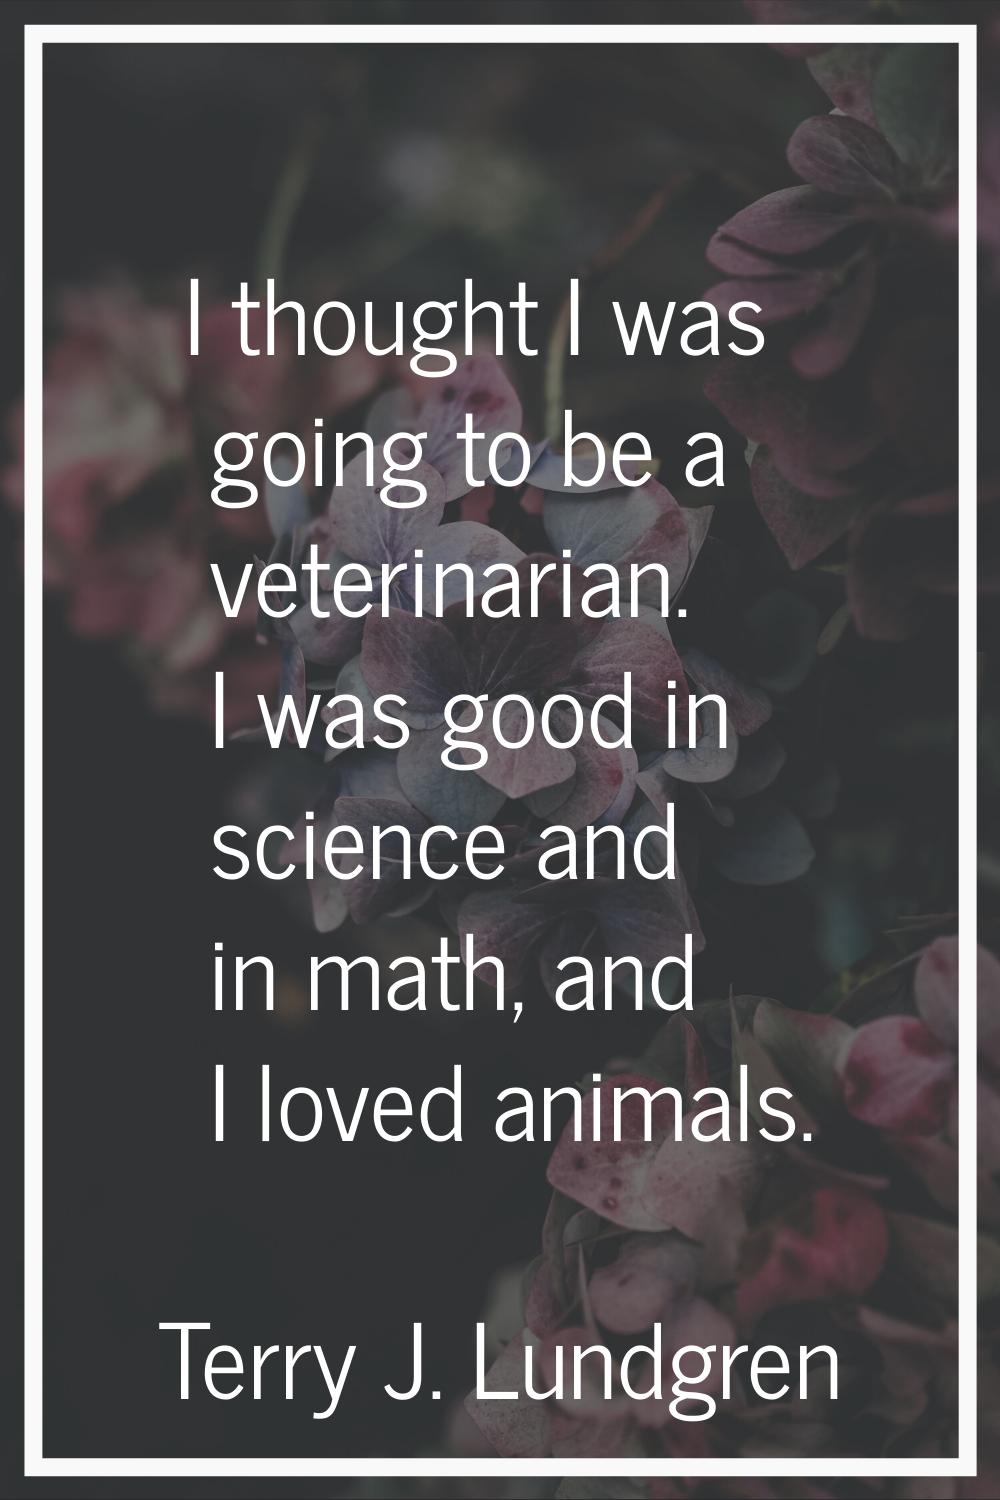 I thought I was going to be a veterinarian. I was good in science and in math, and I loved animals.